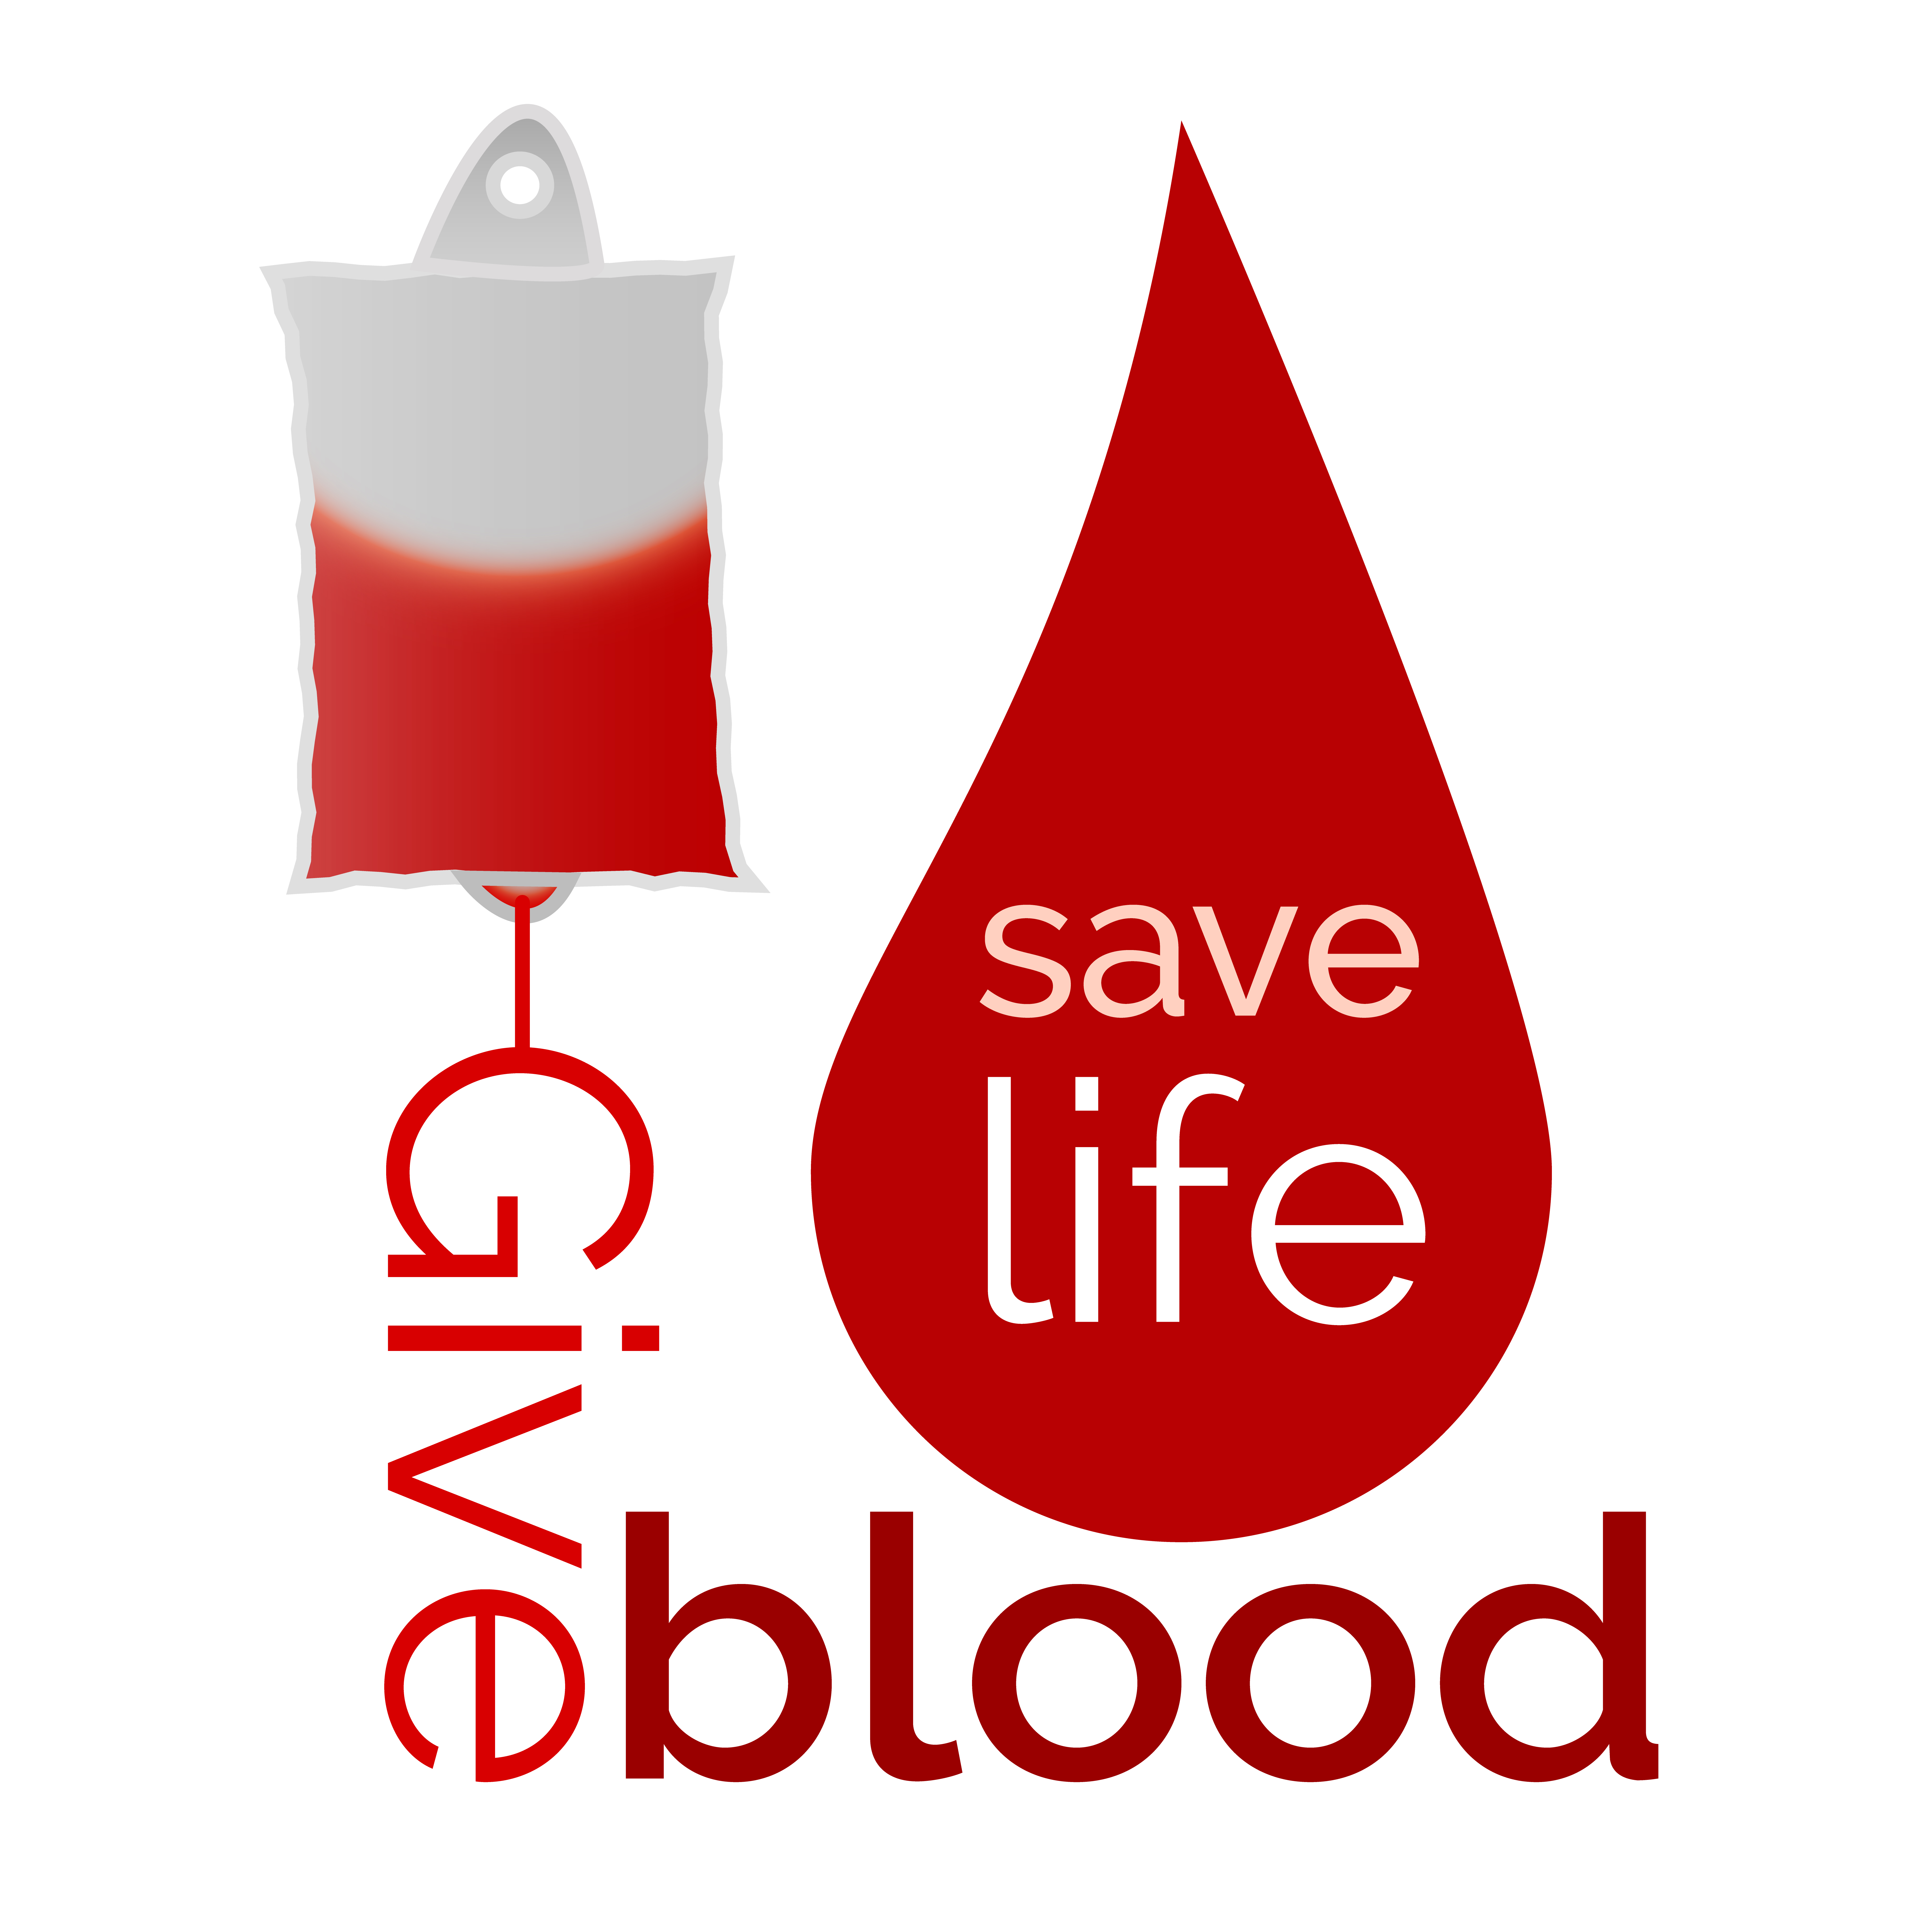 Amazing Blood Donation Pictures & Backgrounds